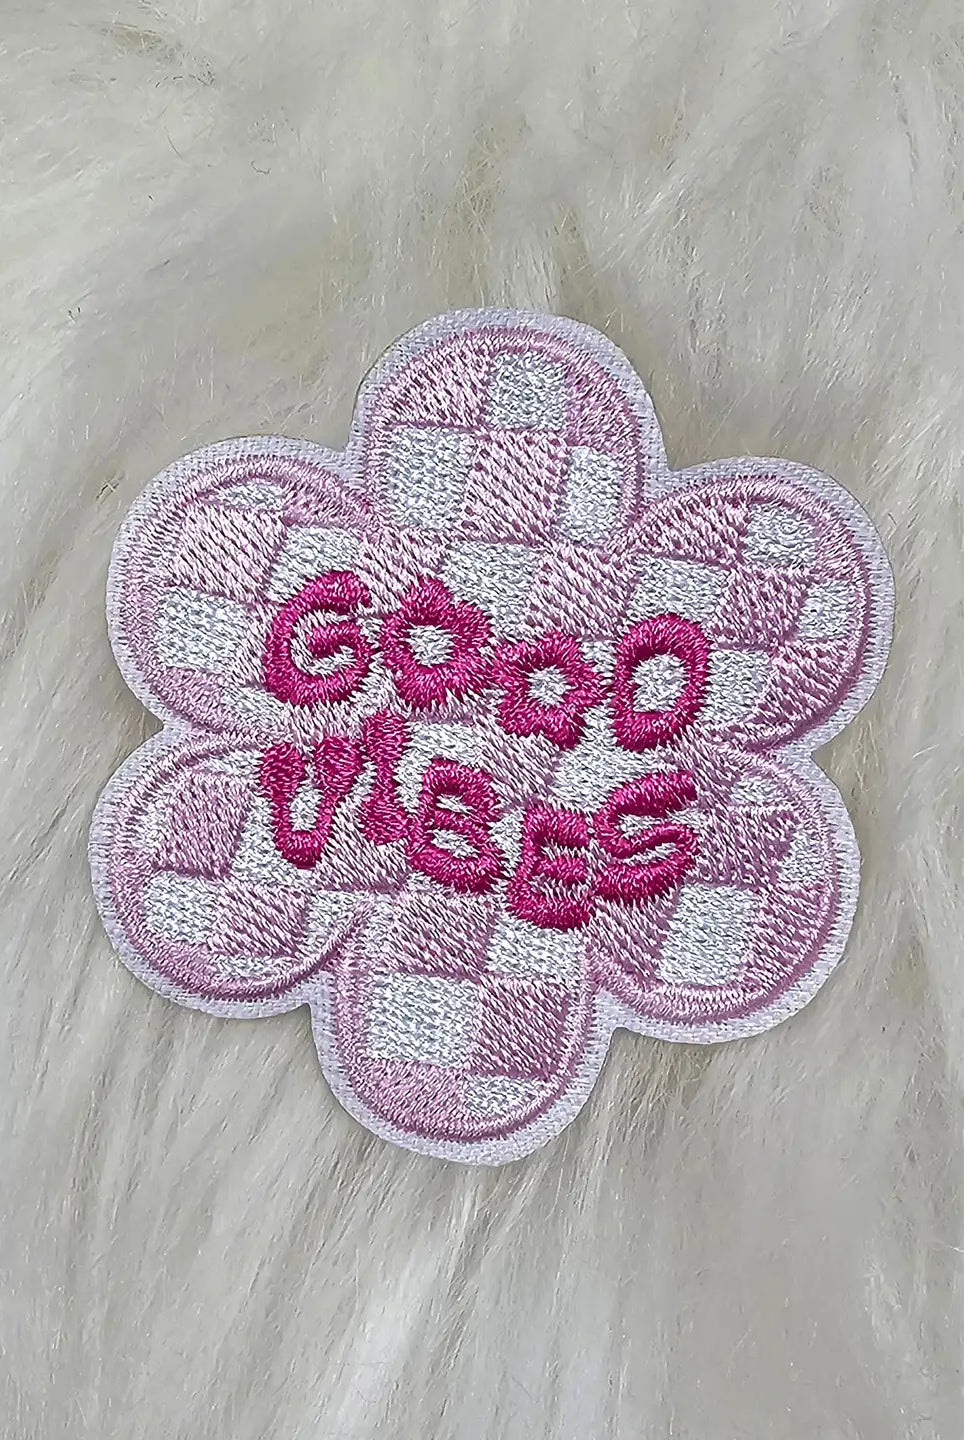 Retro Good Vibes Patch-Accessories-Deadwood South Boutique & Company-Deadwood South Boutique, Women's Fashion Boutique in Henderson, TX